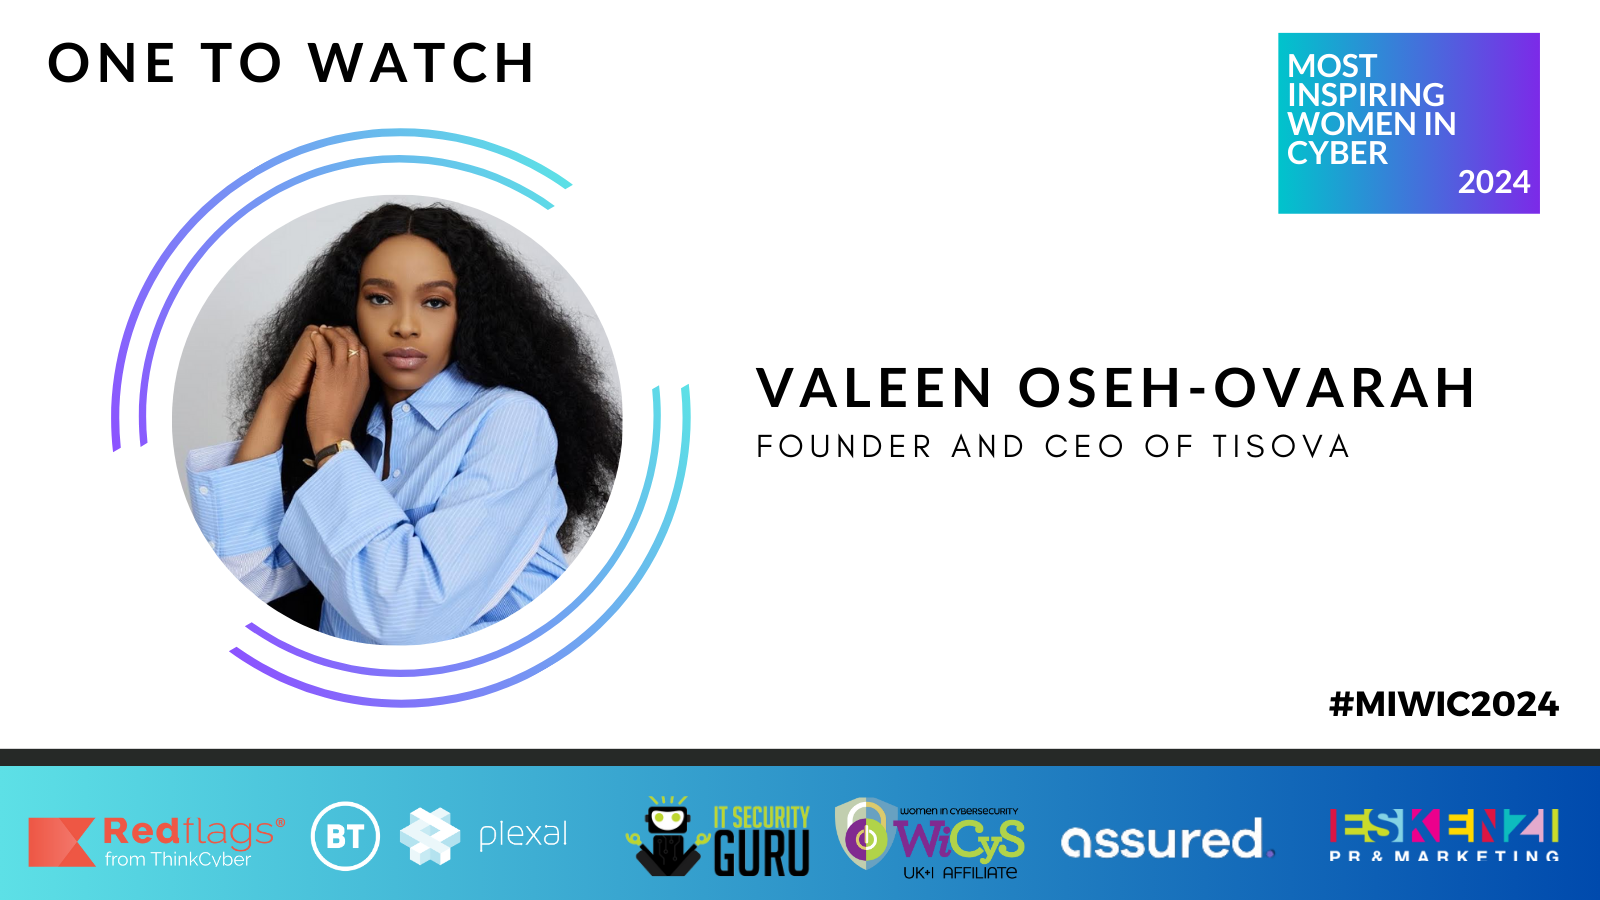 #MIWIC2024 One To Watch: Valeen Oseh-Ovarah, Founder and CEO of TisOva